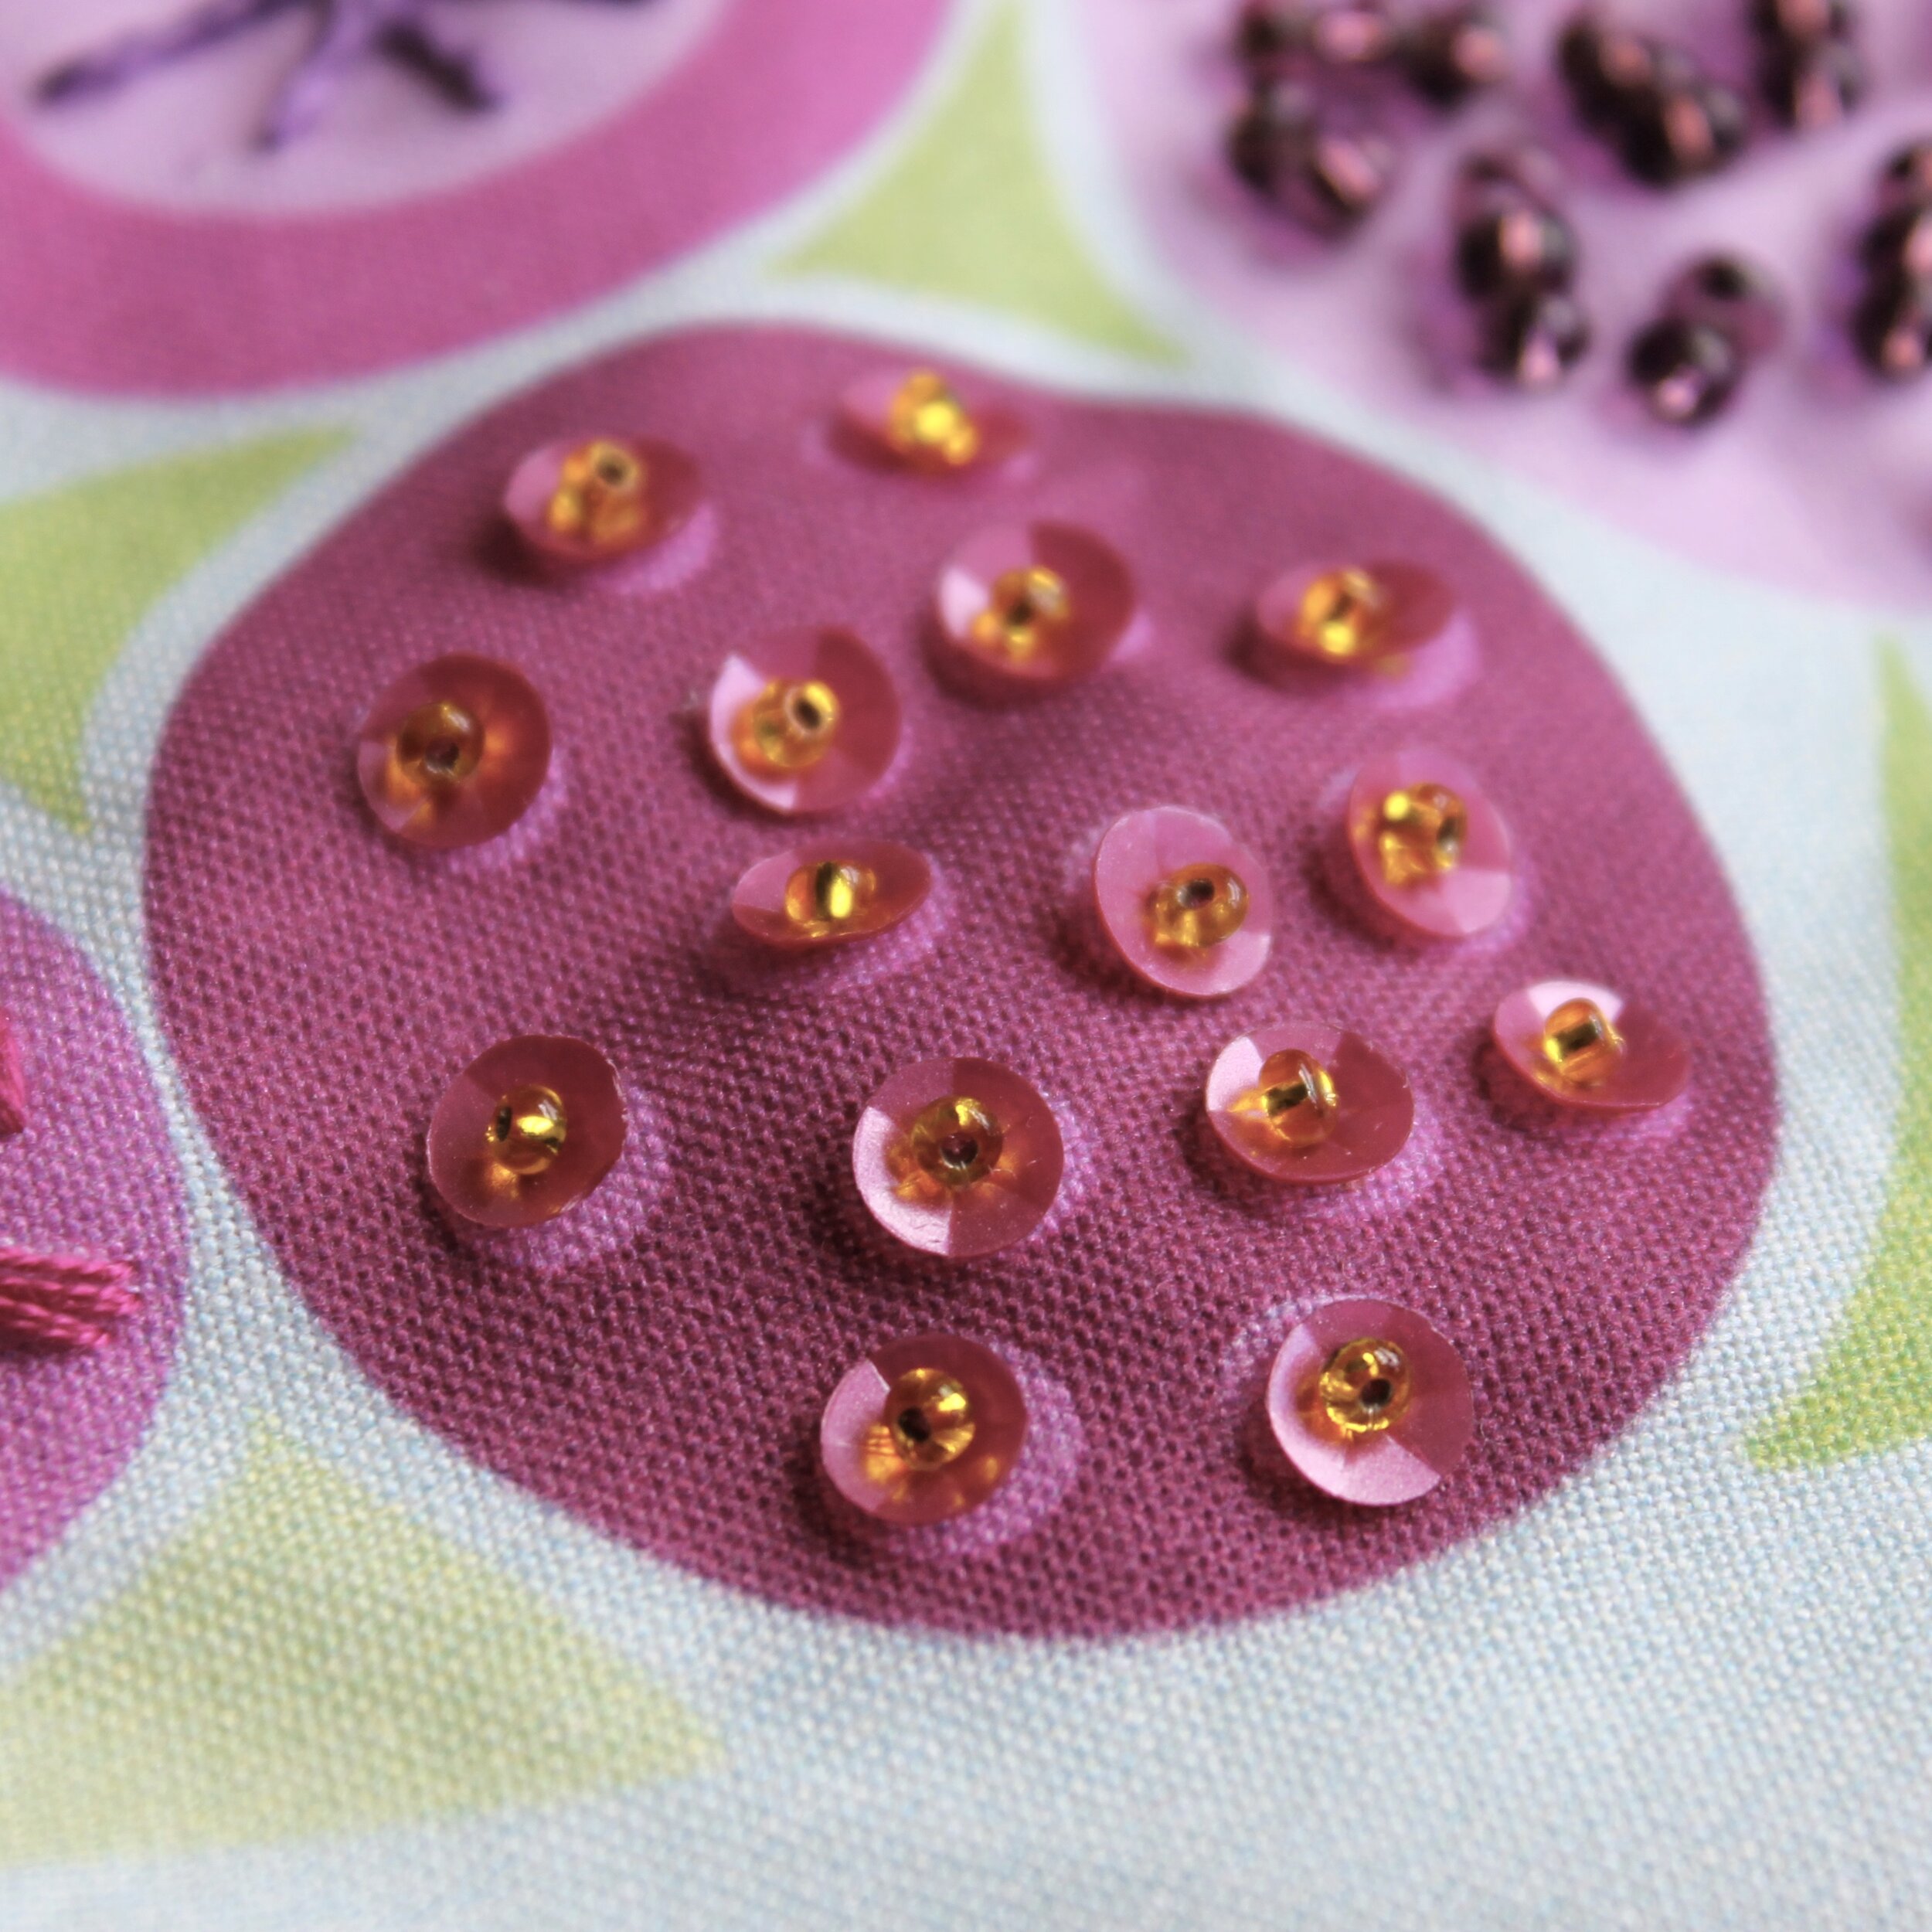 Make Your Stitching Sparkle With Beads and Sequins